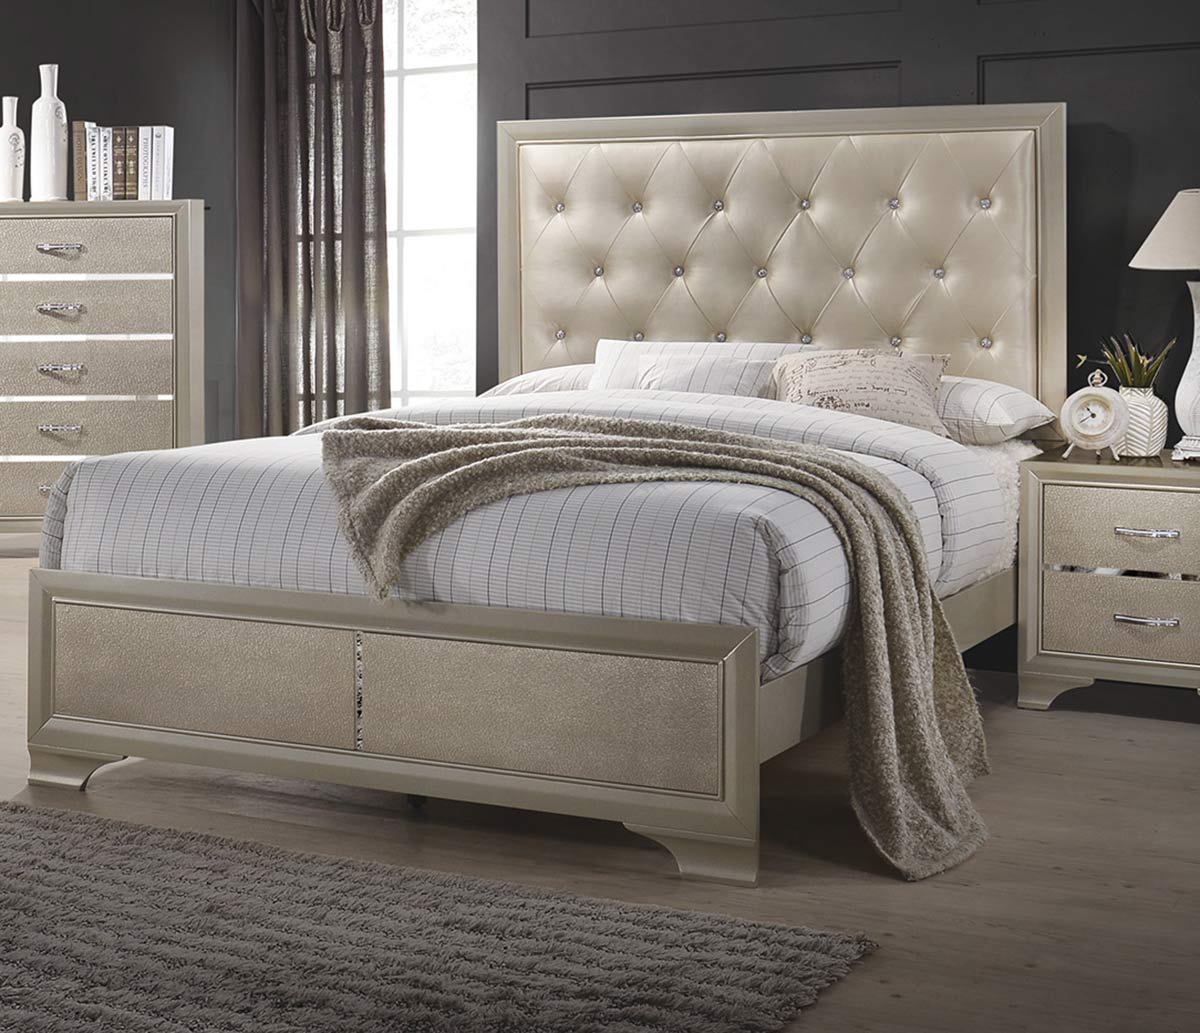 Coaster Beaumont Bed - Champagne Gold Leatherette